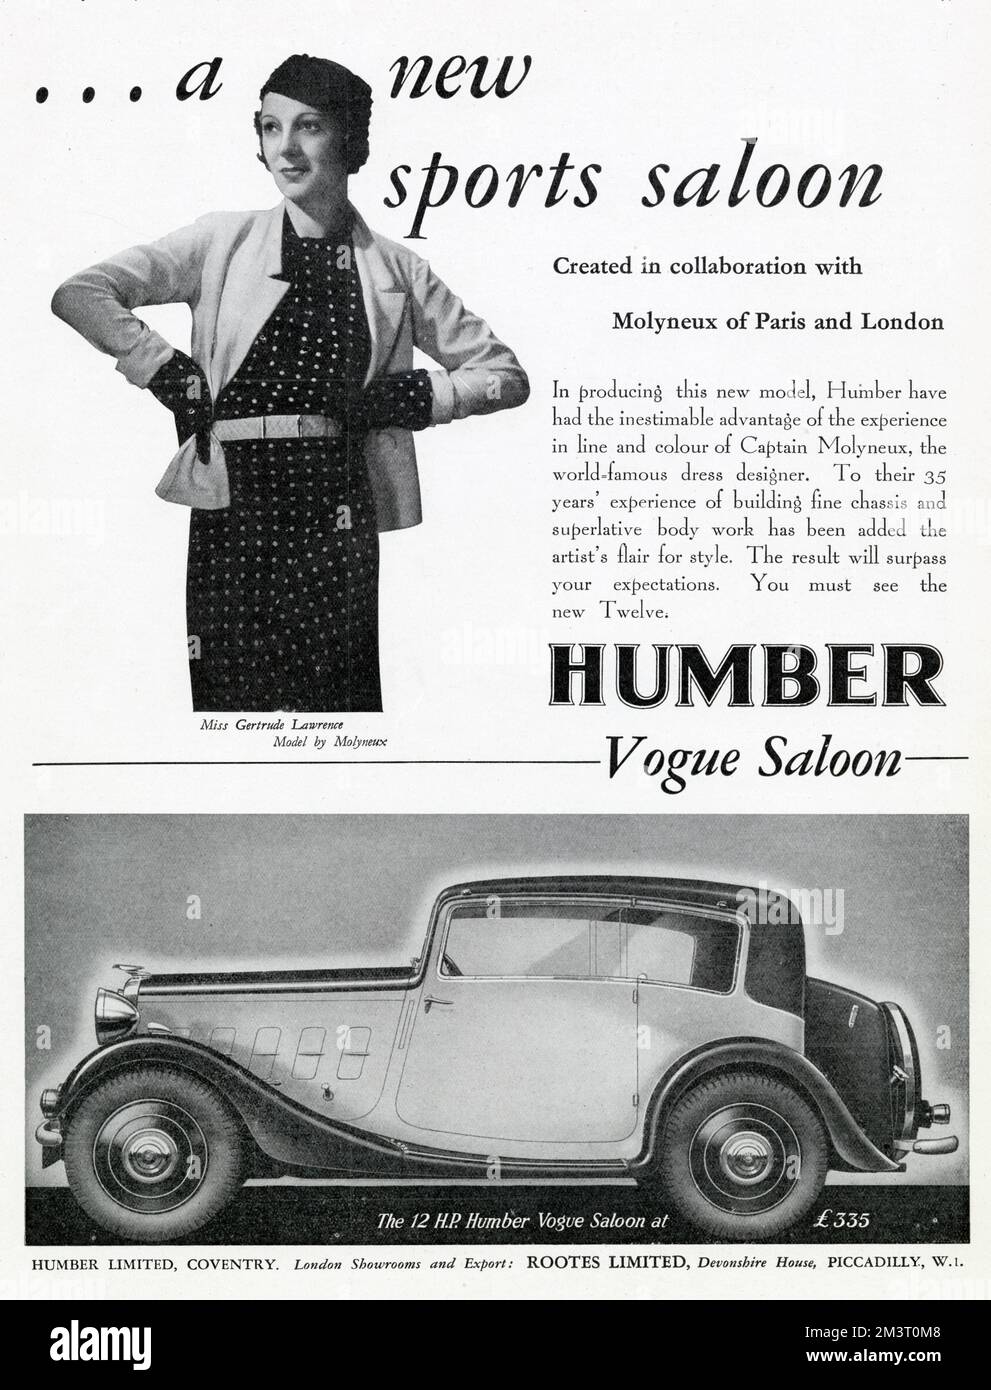 Advertisement for the Humber Vogue Saloon, a special model with design input from couturier Edward Molyneux - there were a number of collaborations between artists/designers and car companies during the 1930s. Pictured in the advertisement is actress Gertrude Lawrence, Molyneux's muse who, almost exclusively, wore his clothes.     Date: 1933 Stock Photo